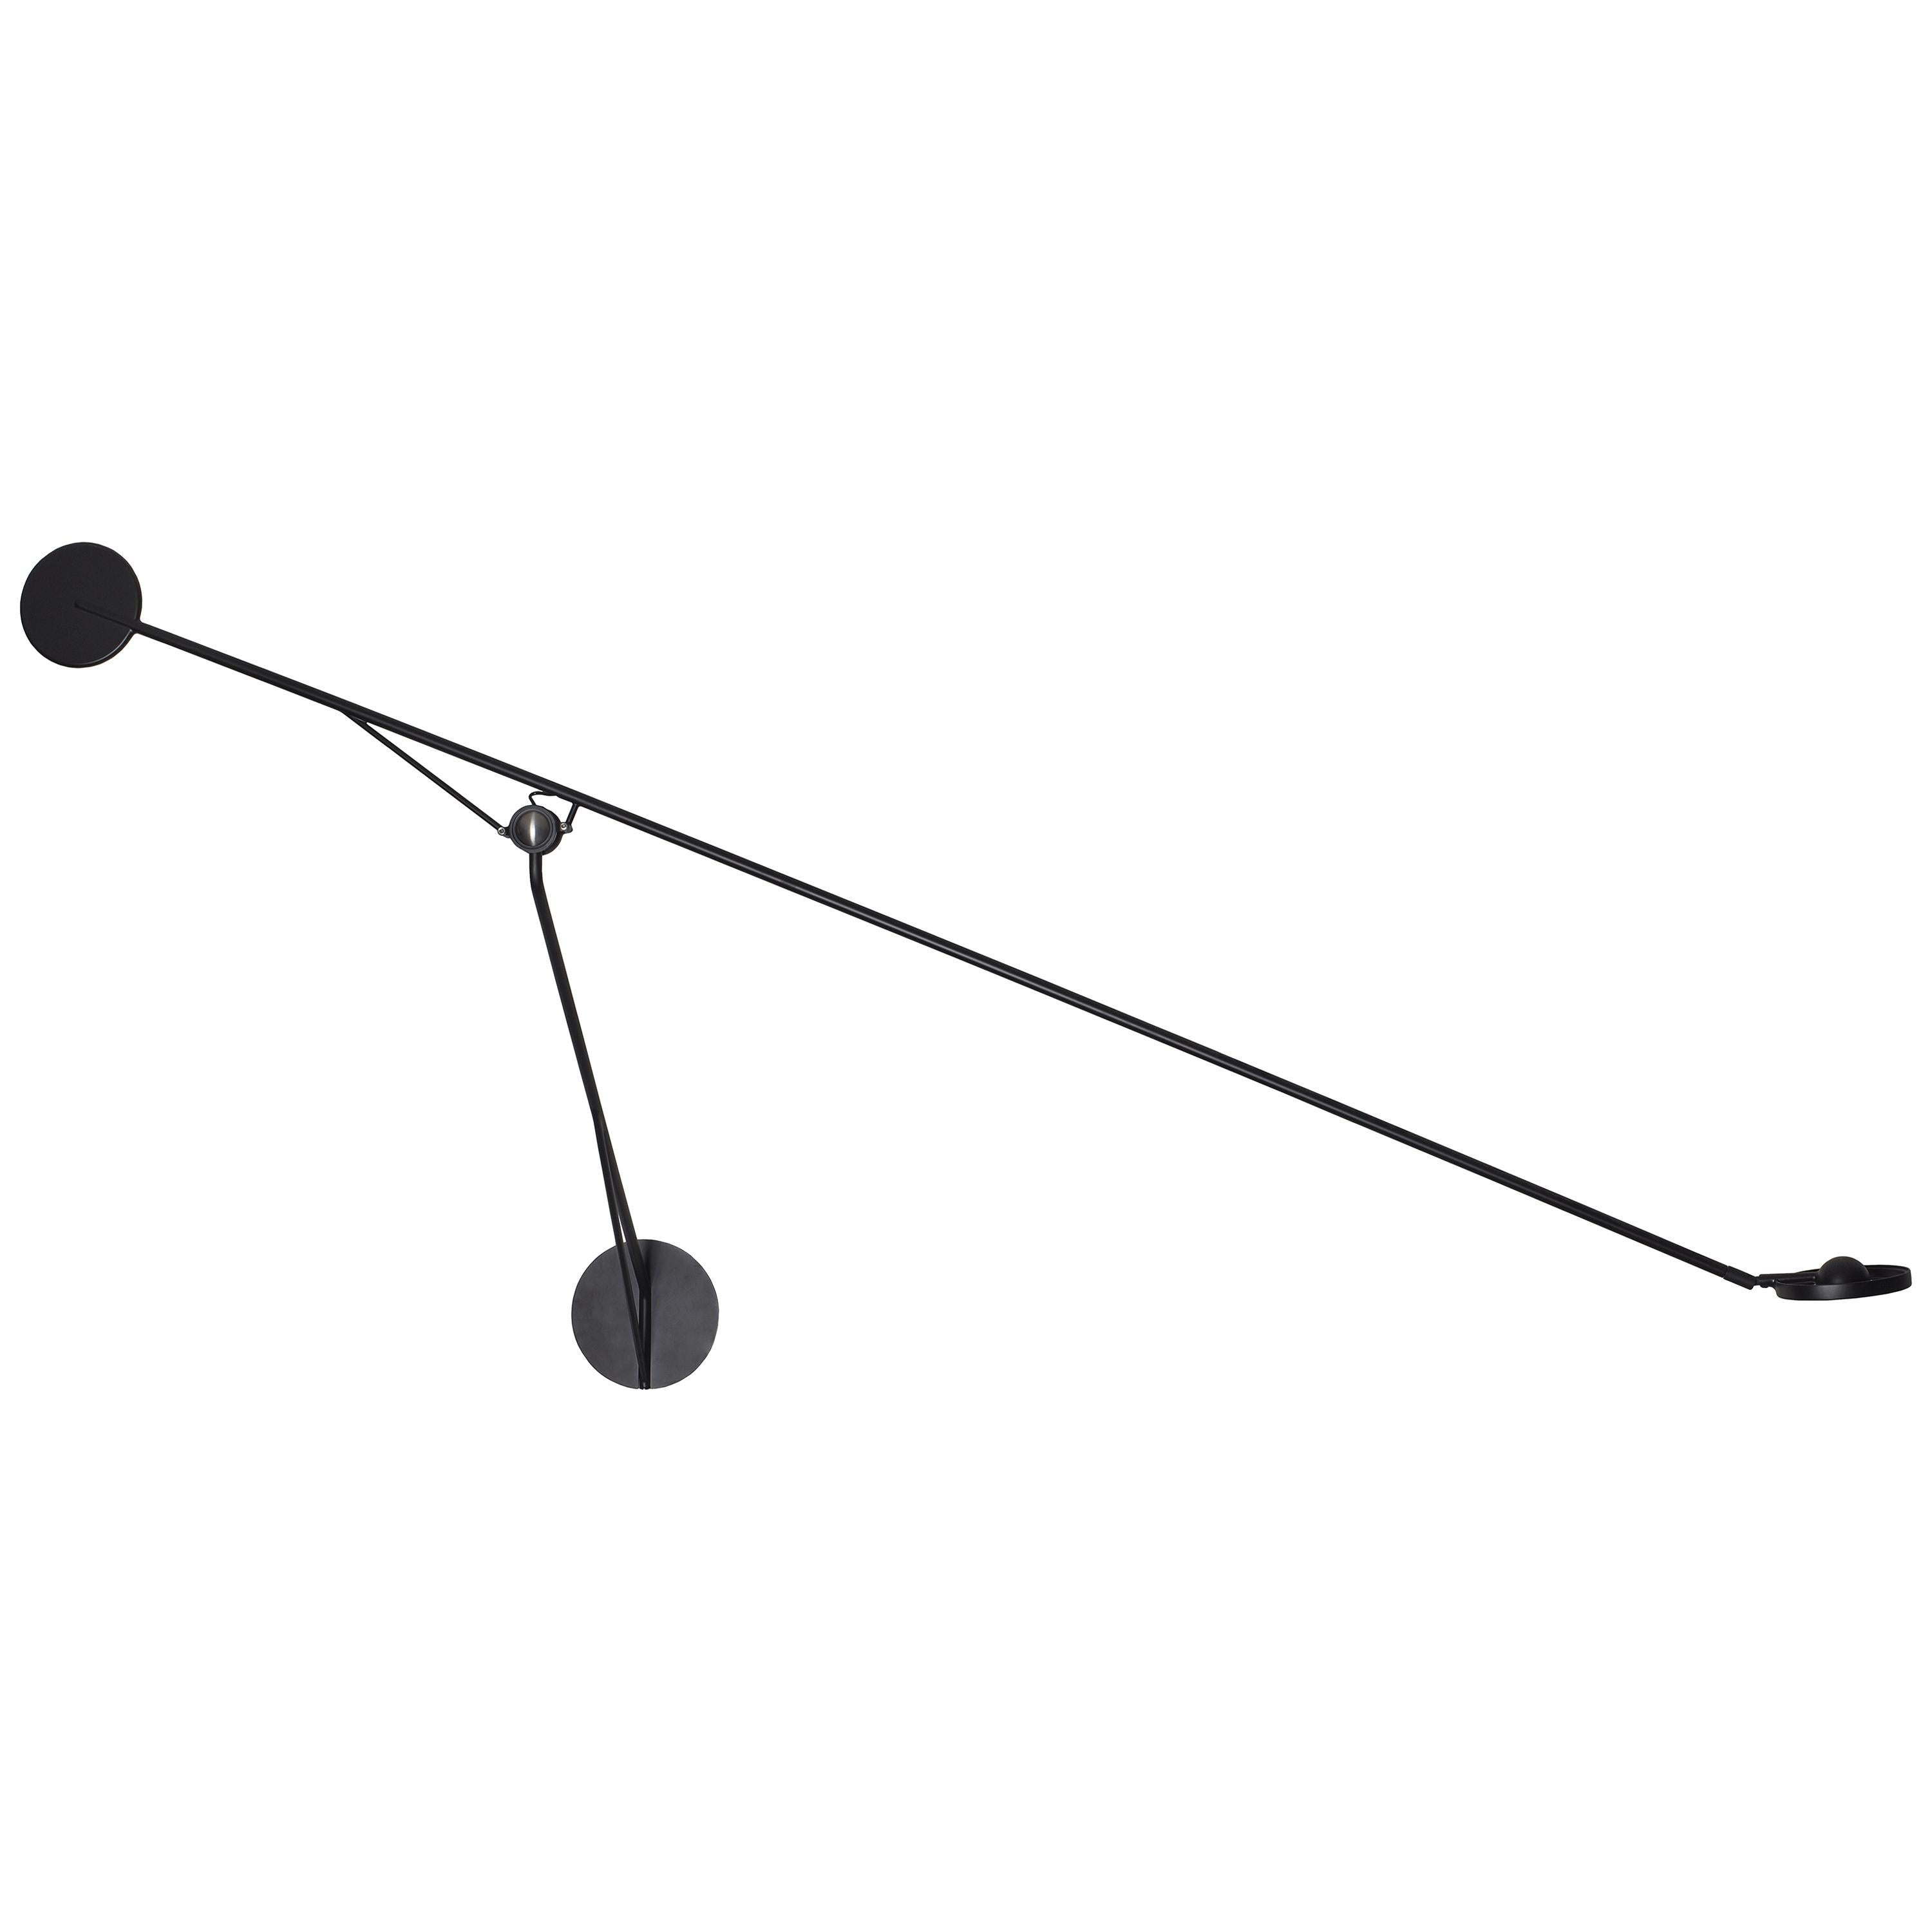 German Designer's AARO Thin Articulated Wall Lamp with a Balance System For Sale